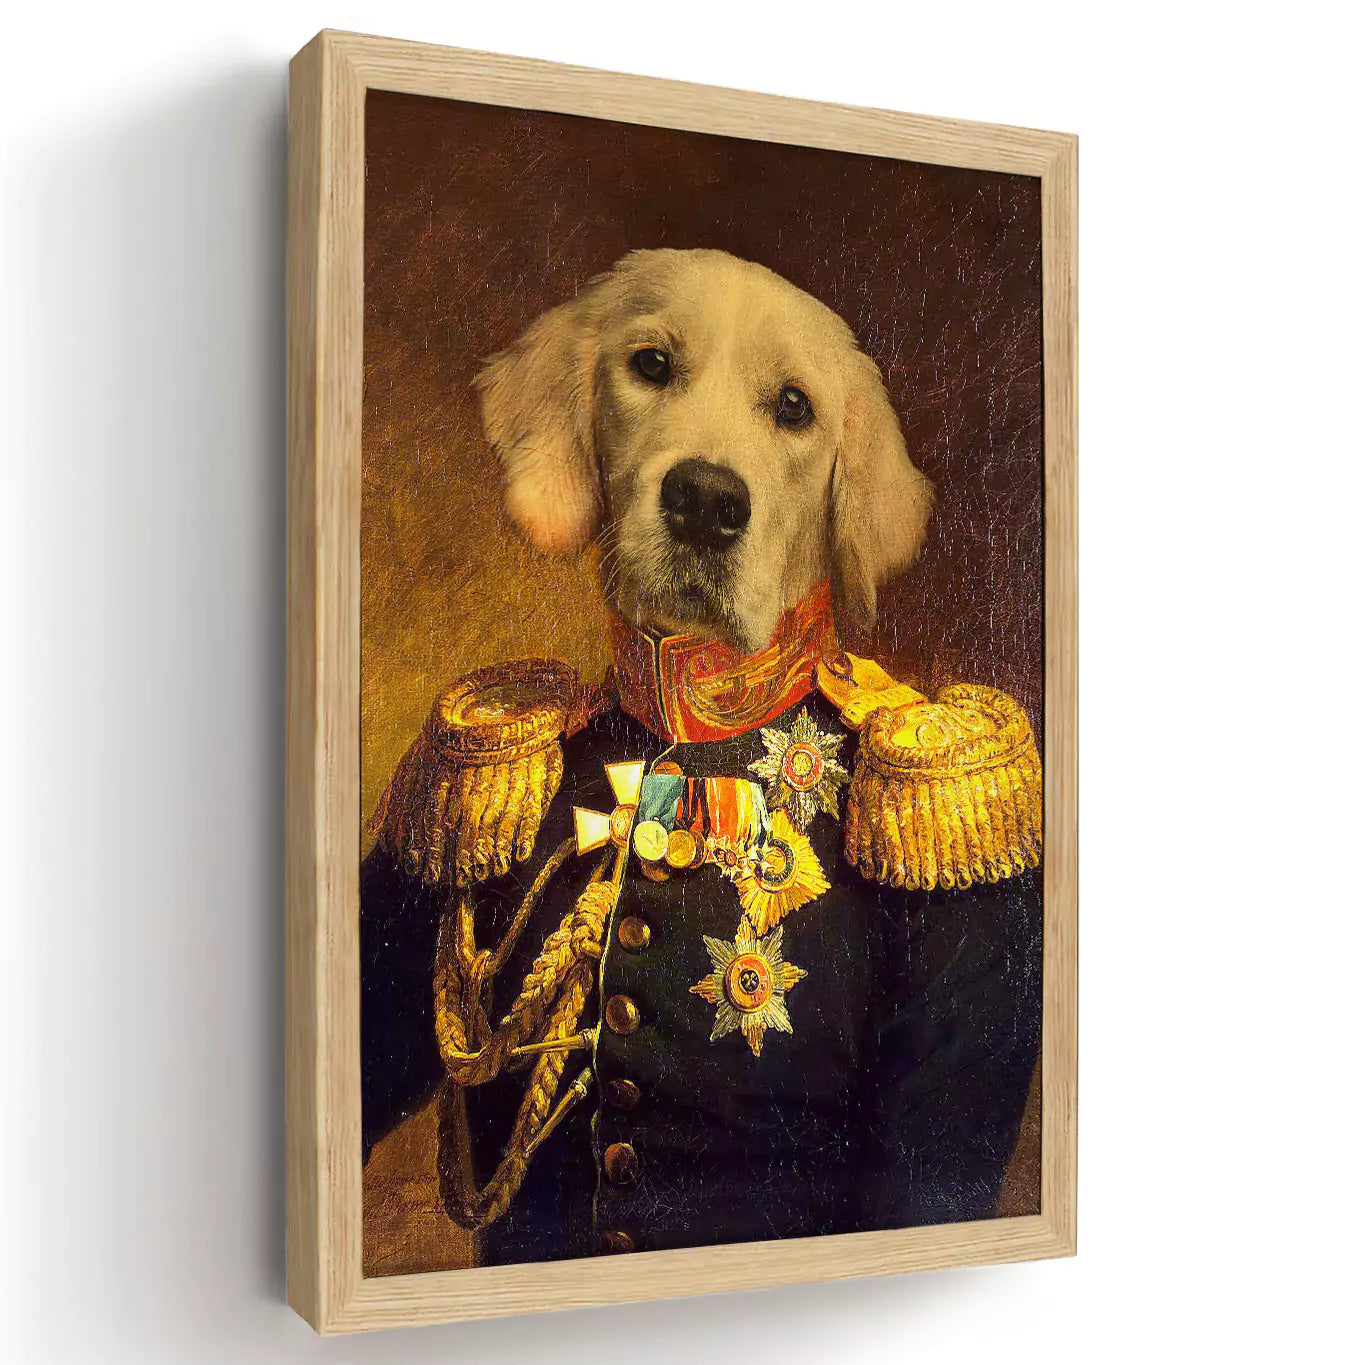 royal dog painting, renaissance dog painting, admiral dog print, admiral pet print, admiral dog canvas, vintage dog art, dog wearing vintage clothes, dog in admiral outfil with epaulettes, wooden picture frame